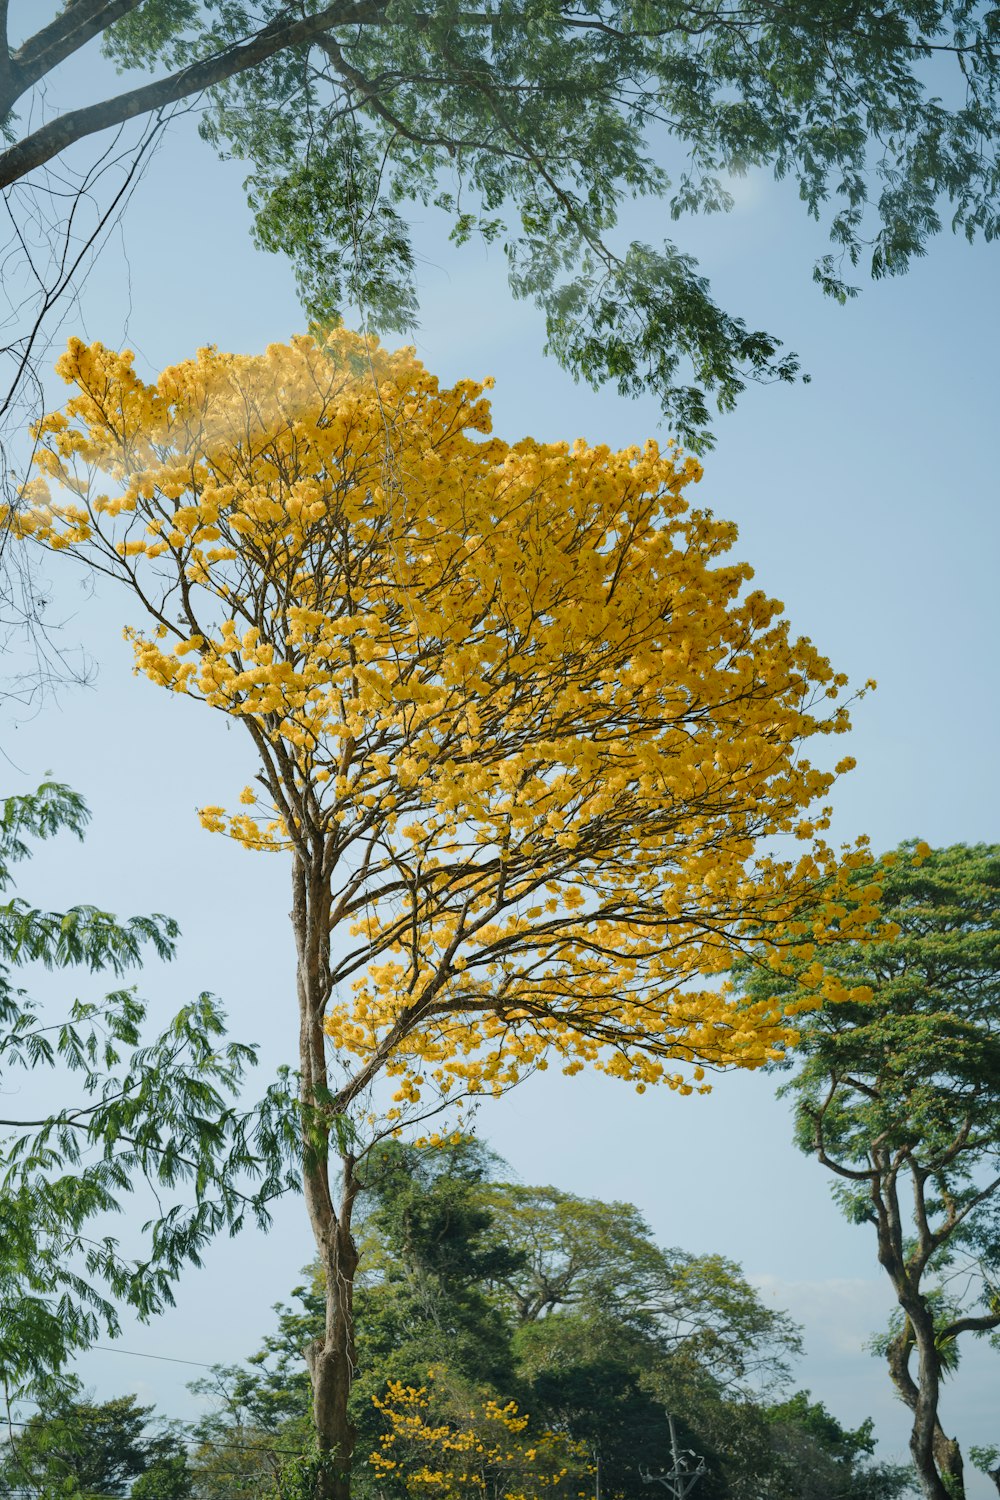 a tree with yellow flowers in the middle of a forest